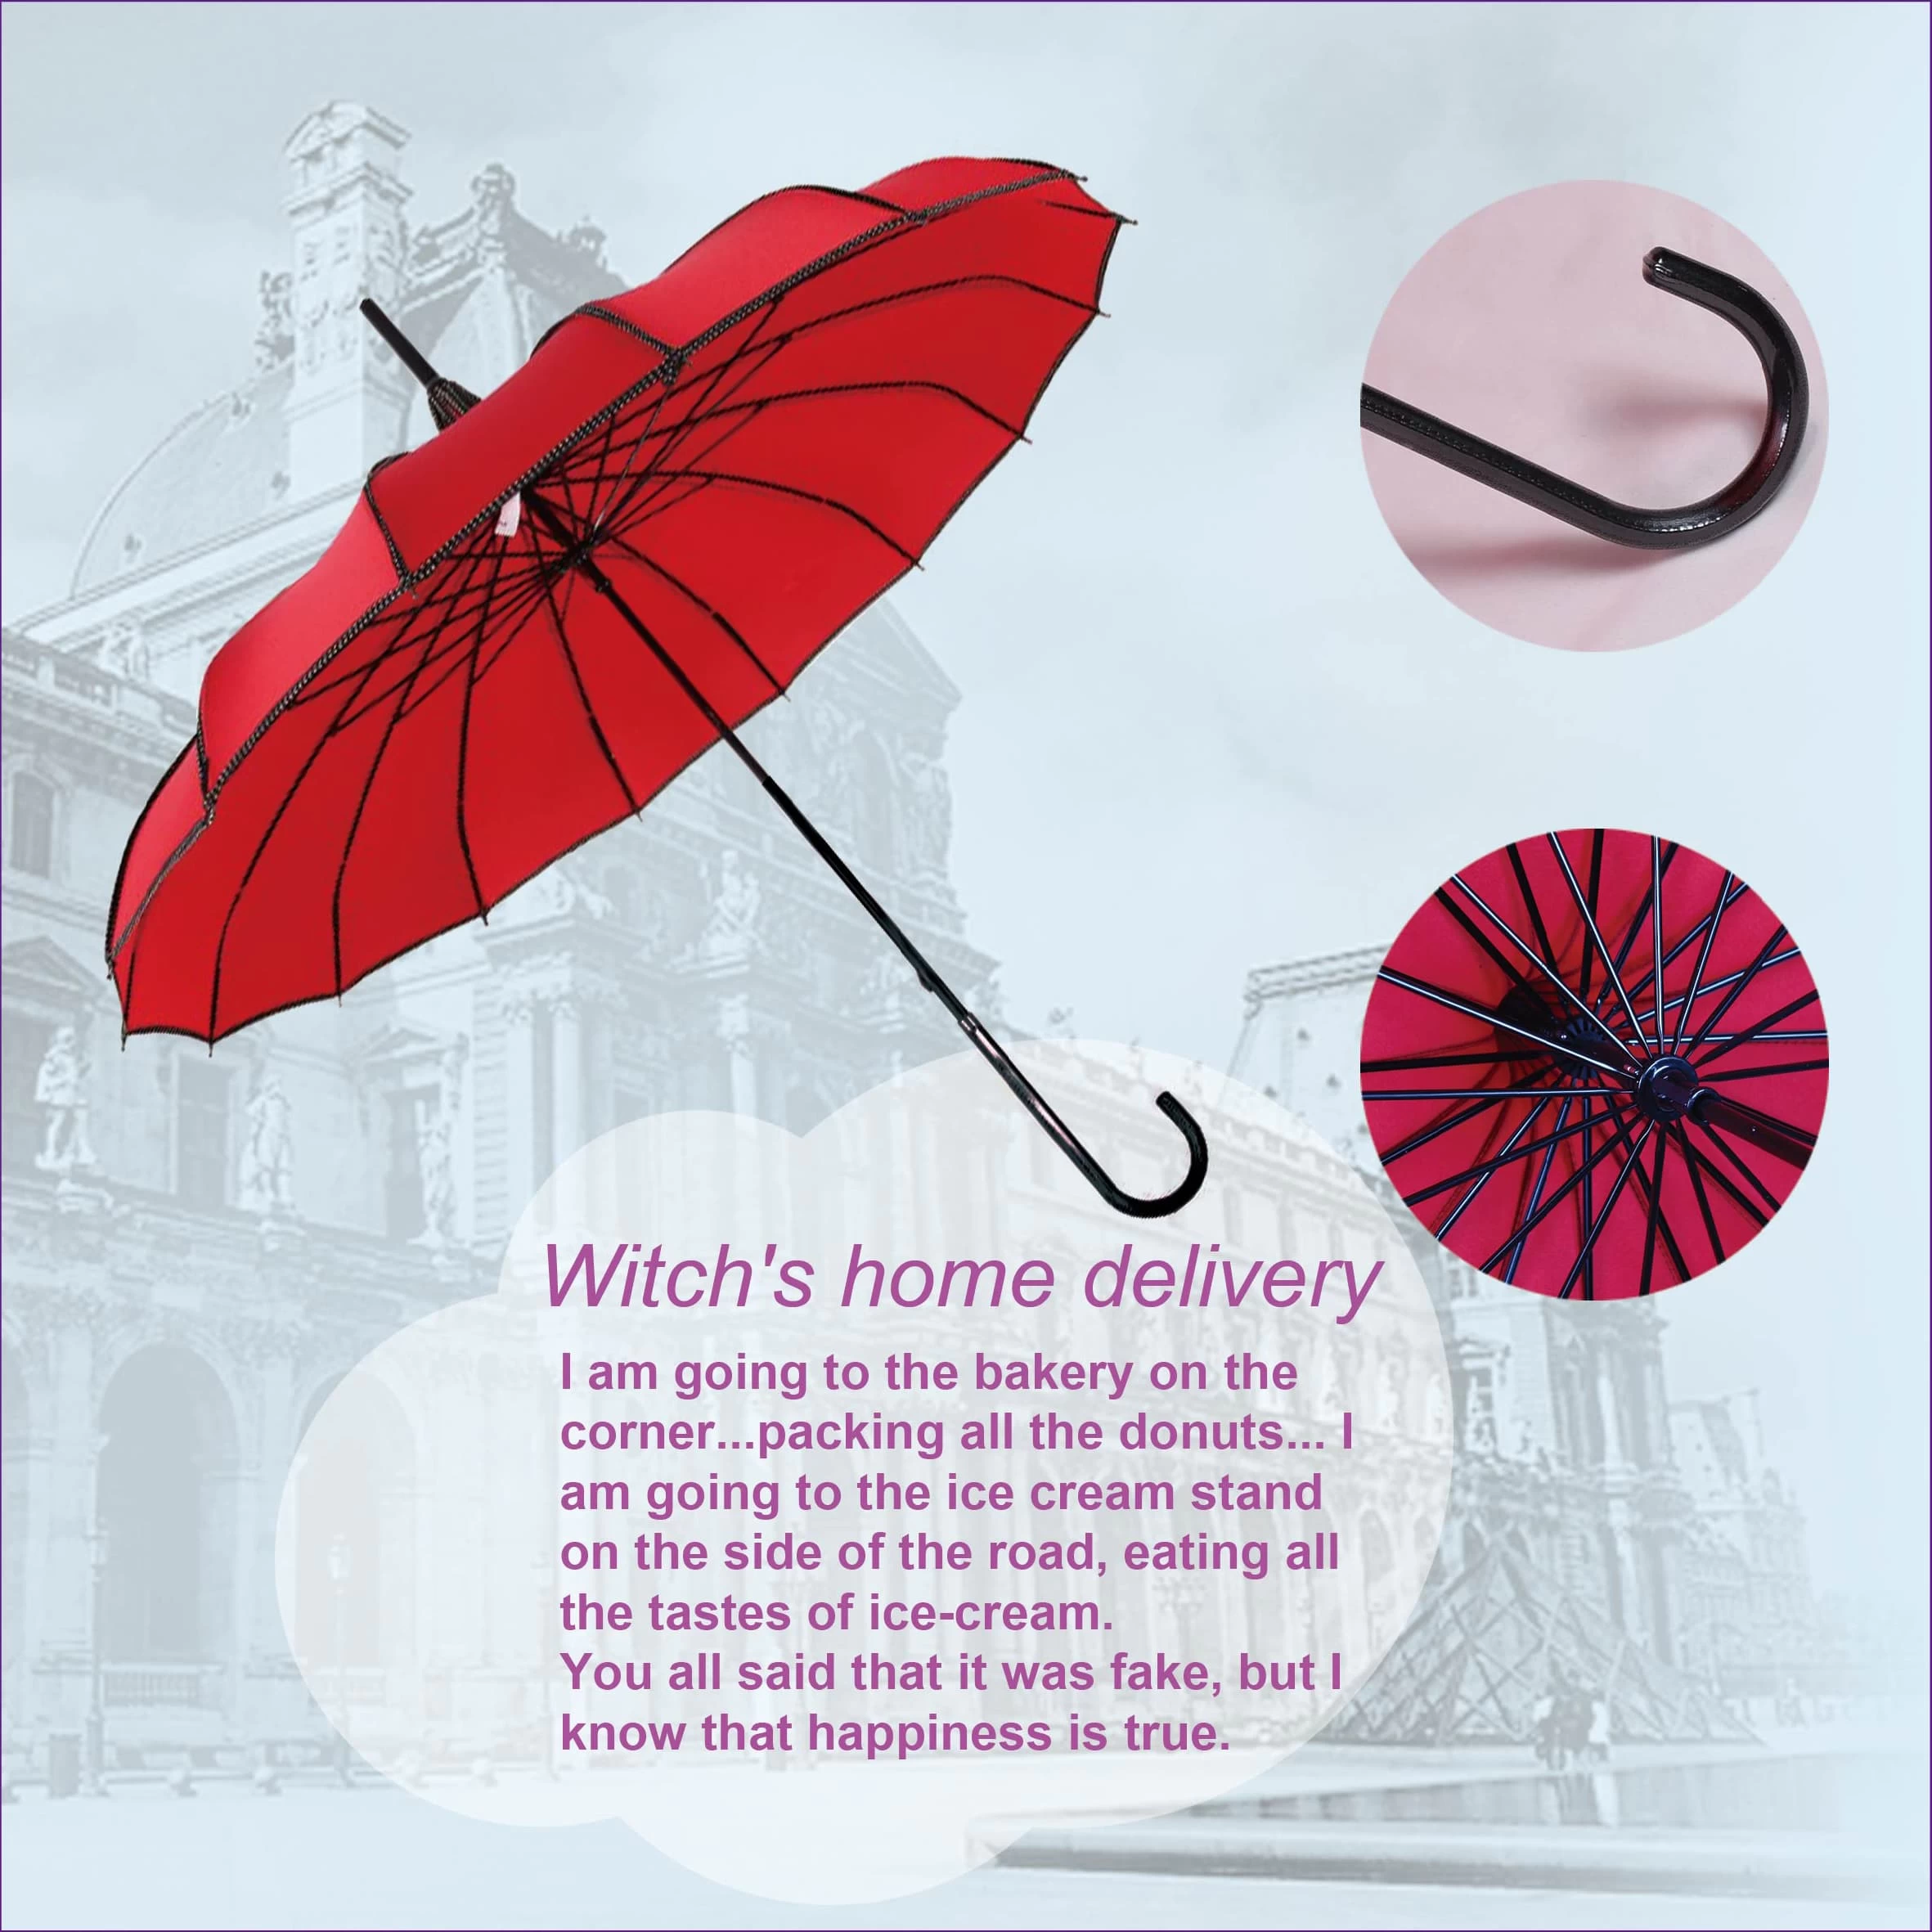 Why not choose a better looking umbrella